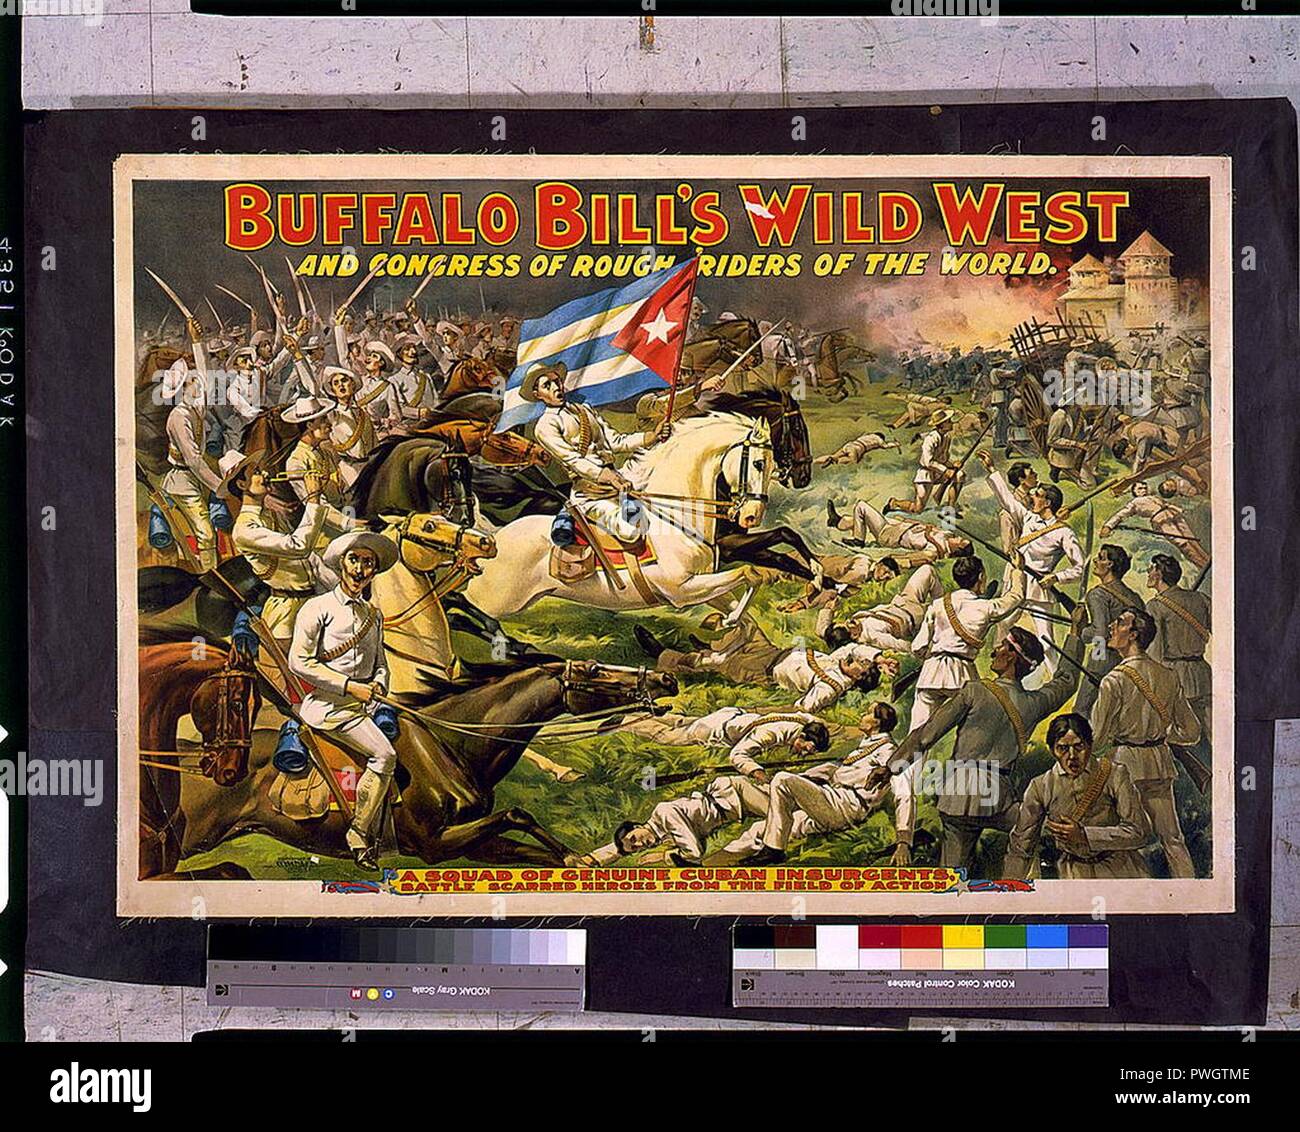 Buffalo Bill's wild west and congress of rough riders of the world. A squad of genuine Cuban insurgents, ... Stock Photo